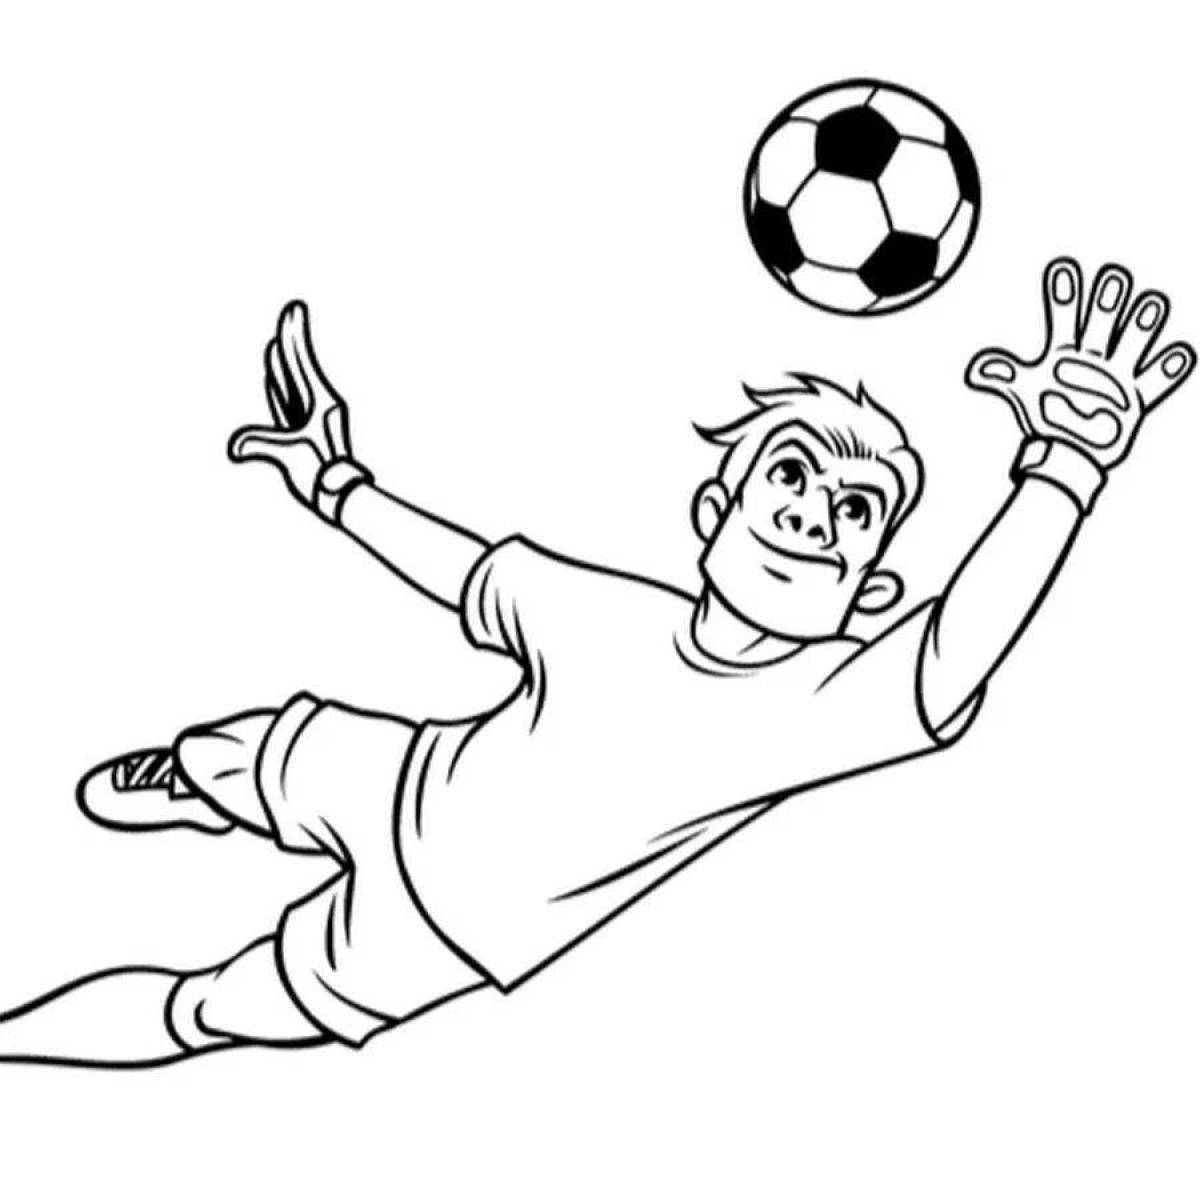 Coloring page dazzling football